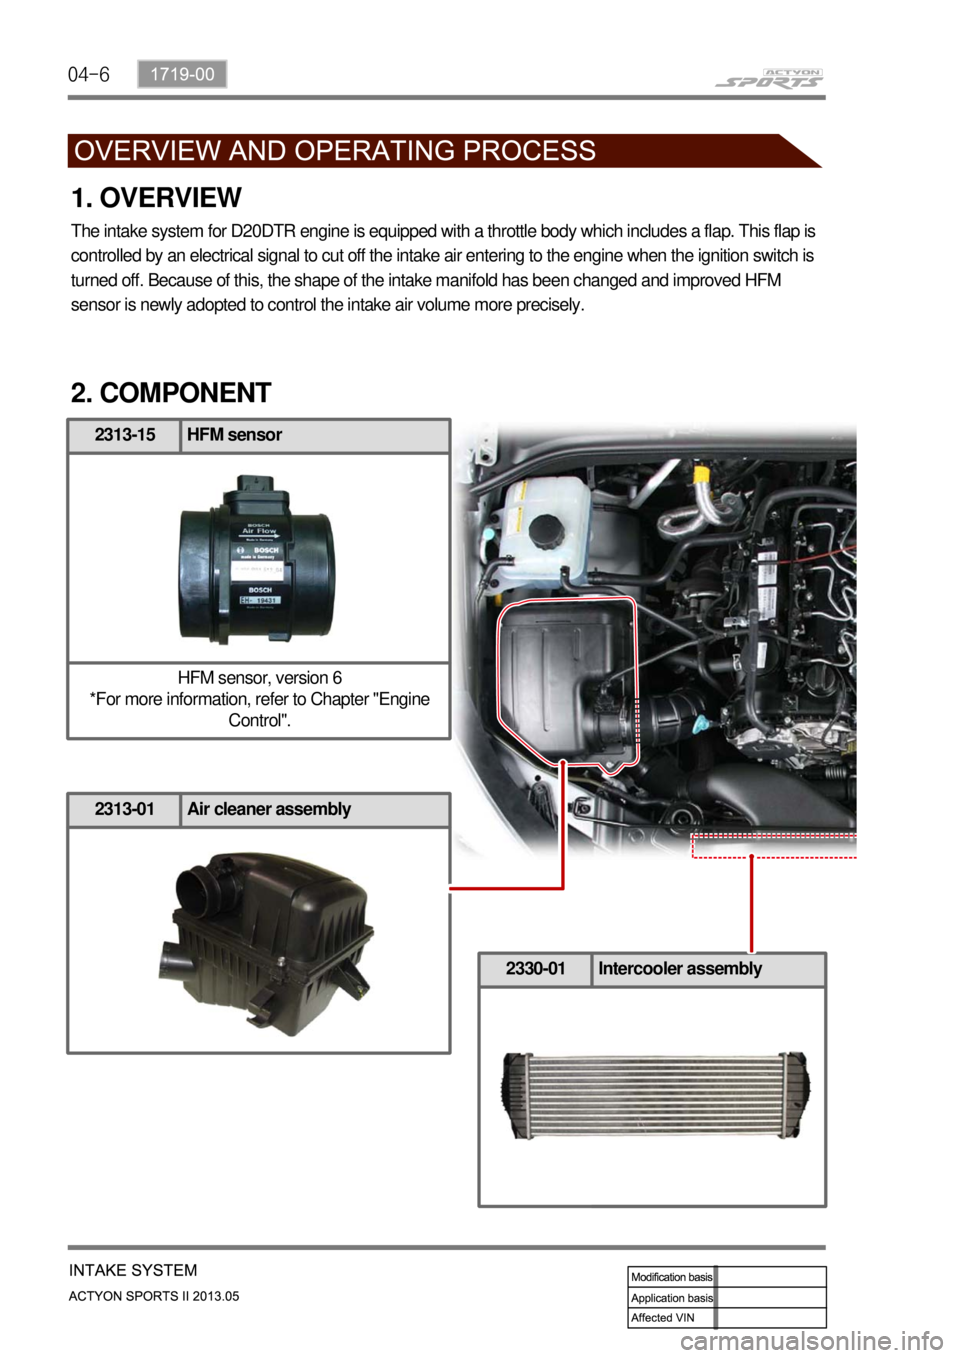 SSANGYONG NEW ACTYON SPORTS 2013  Service Manual 04-6
1. OVERVIEW
The intake system for D20DTR engine is equipped with a throttle body which includes a flap. This flap is 
controlled by an electrical signal to cut off the intake air entering to the 